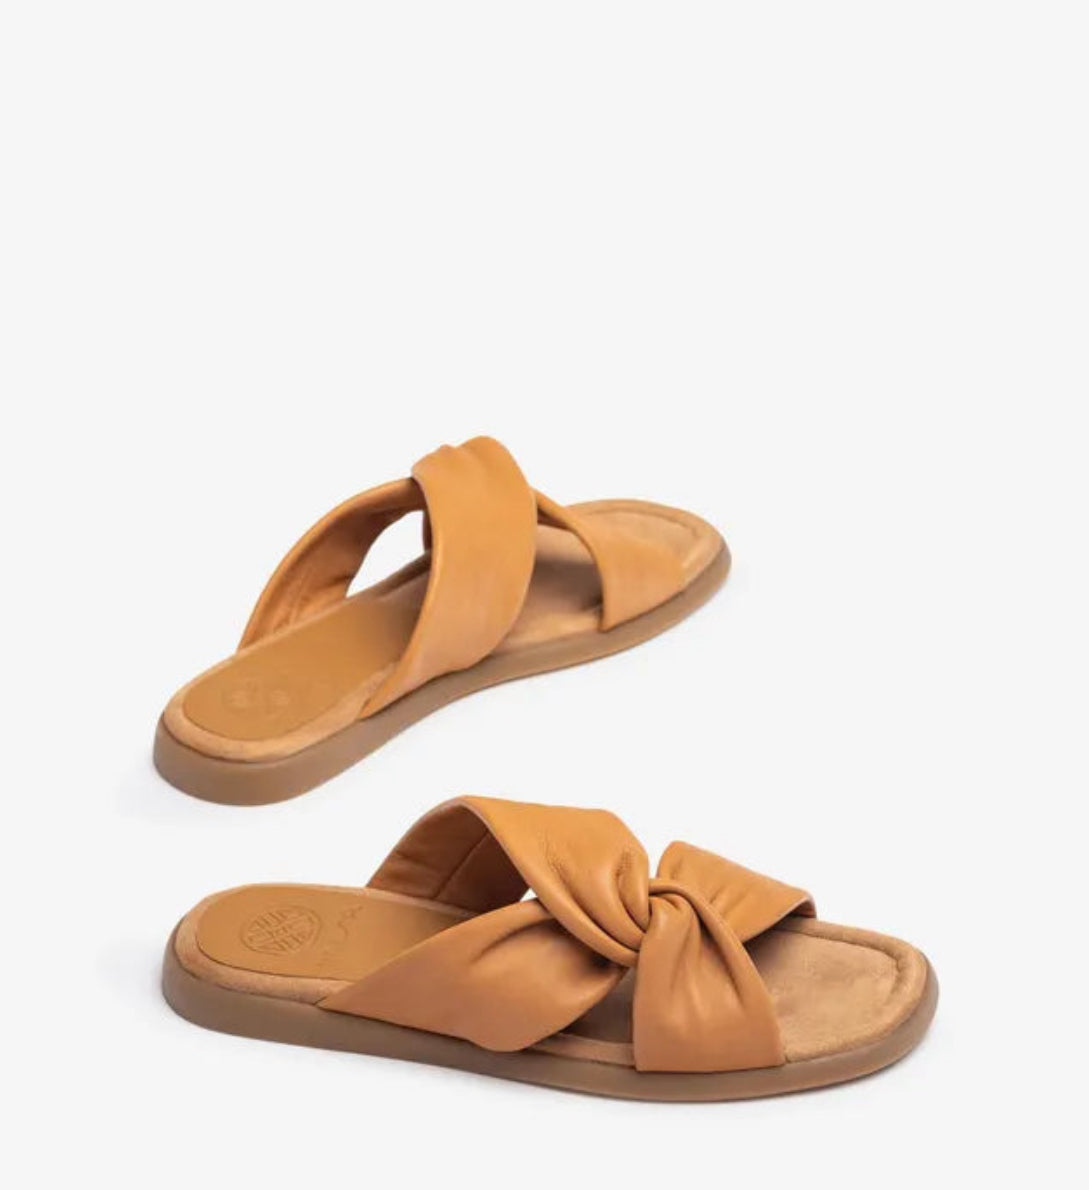 Unisa - Camby Tan Leather Slide